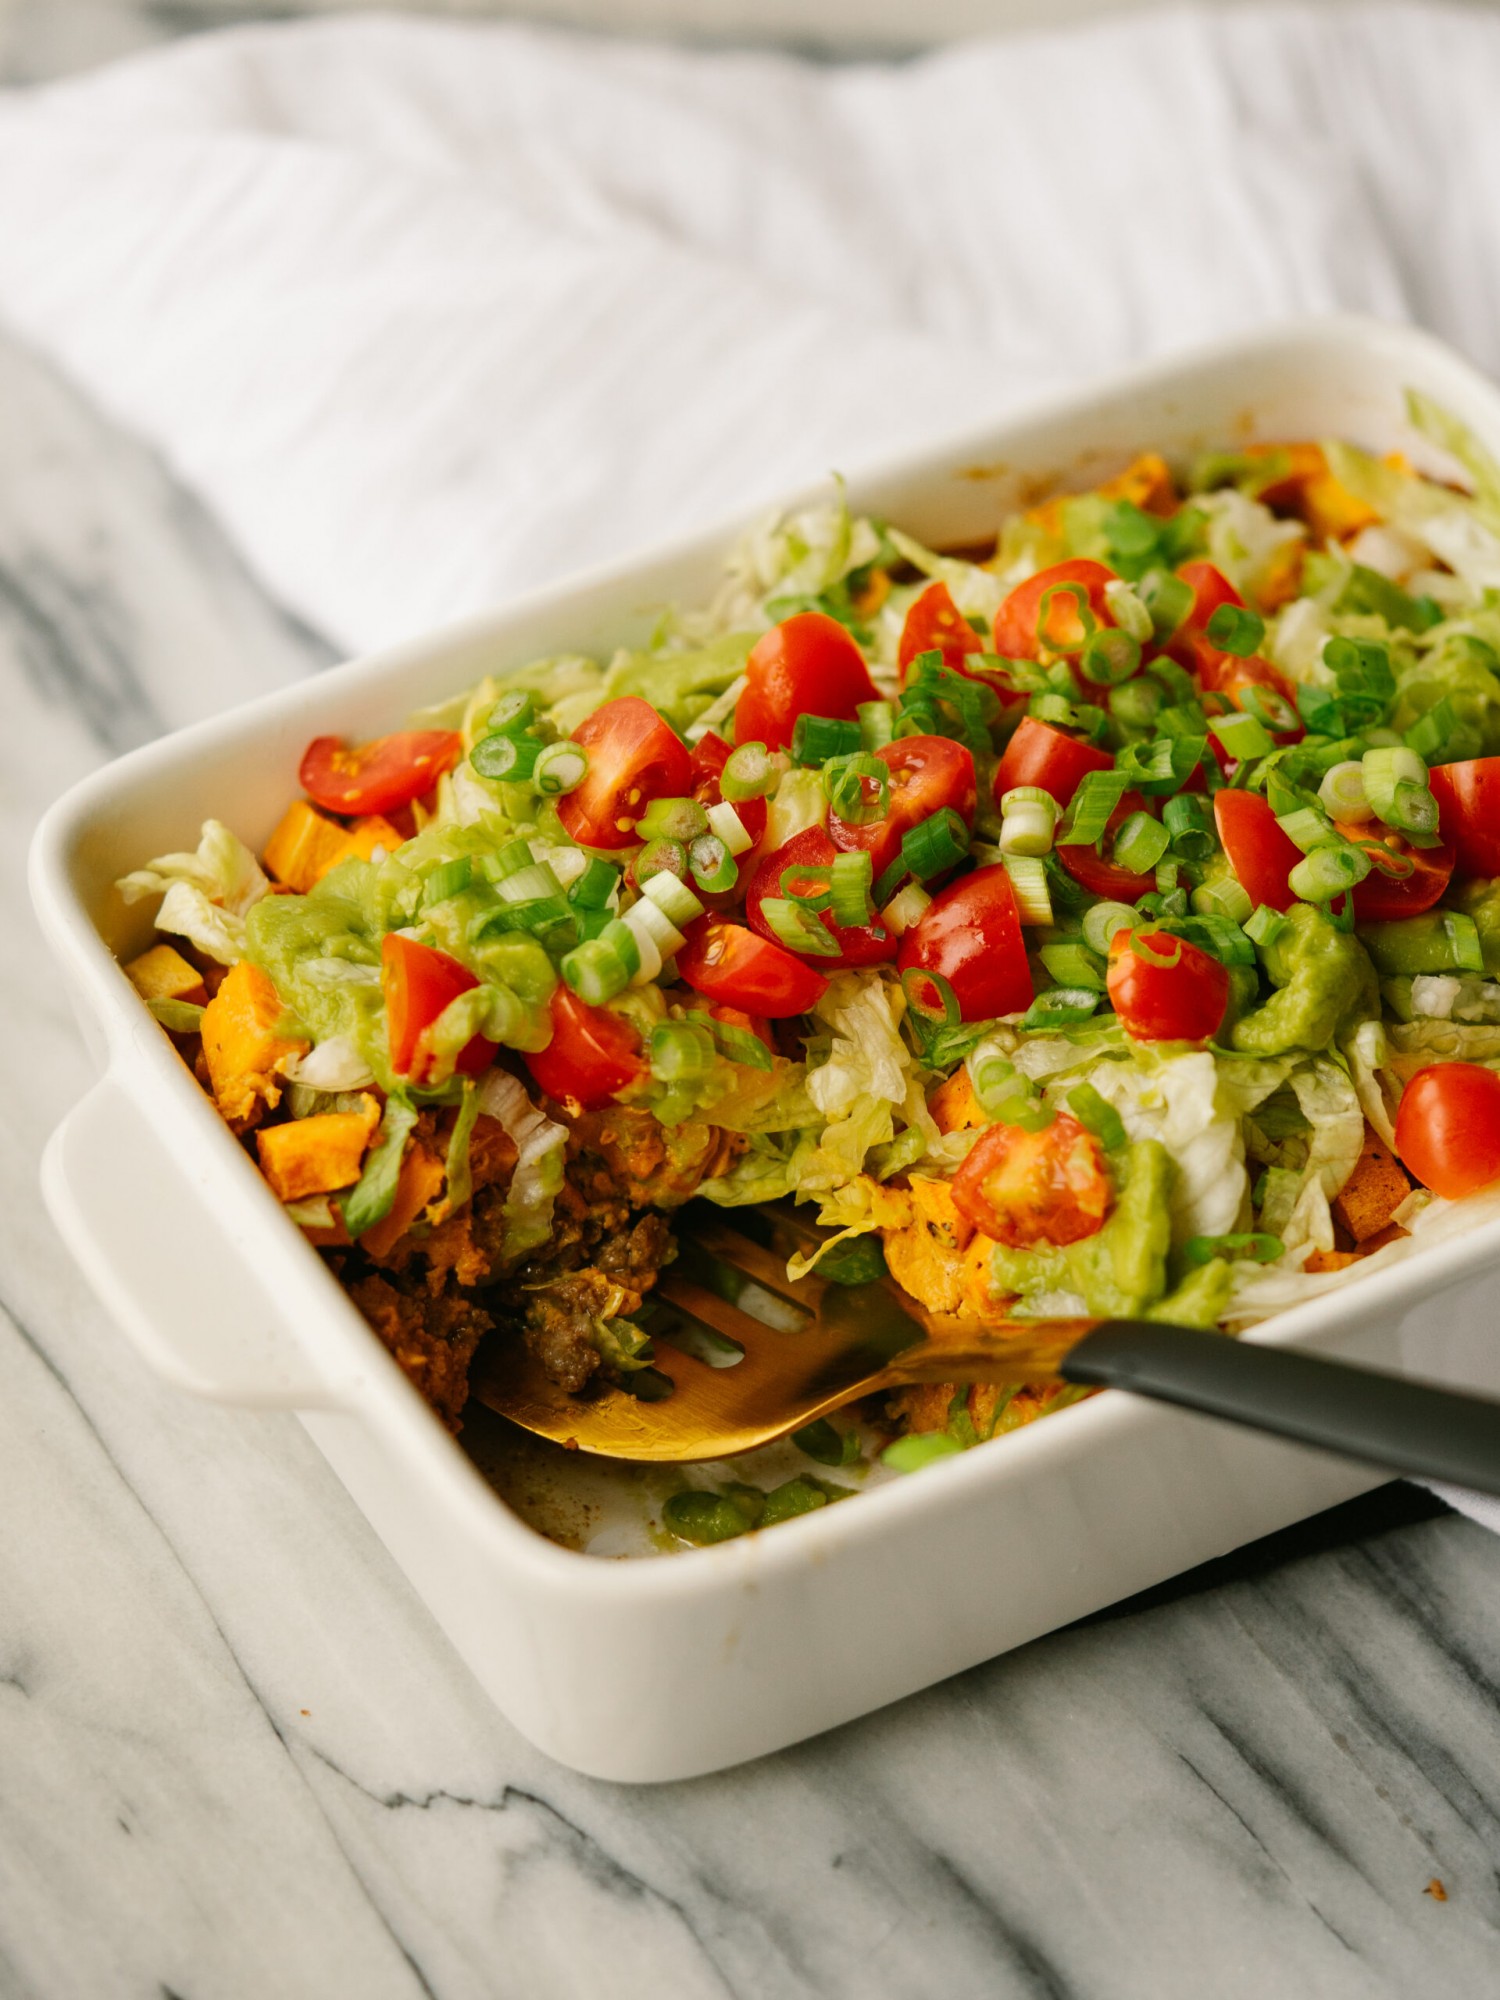 Three quarter view of a casserole with a taco base topped with sweet potatoes, lettuce and tomatoes